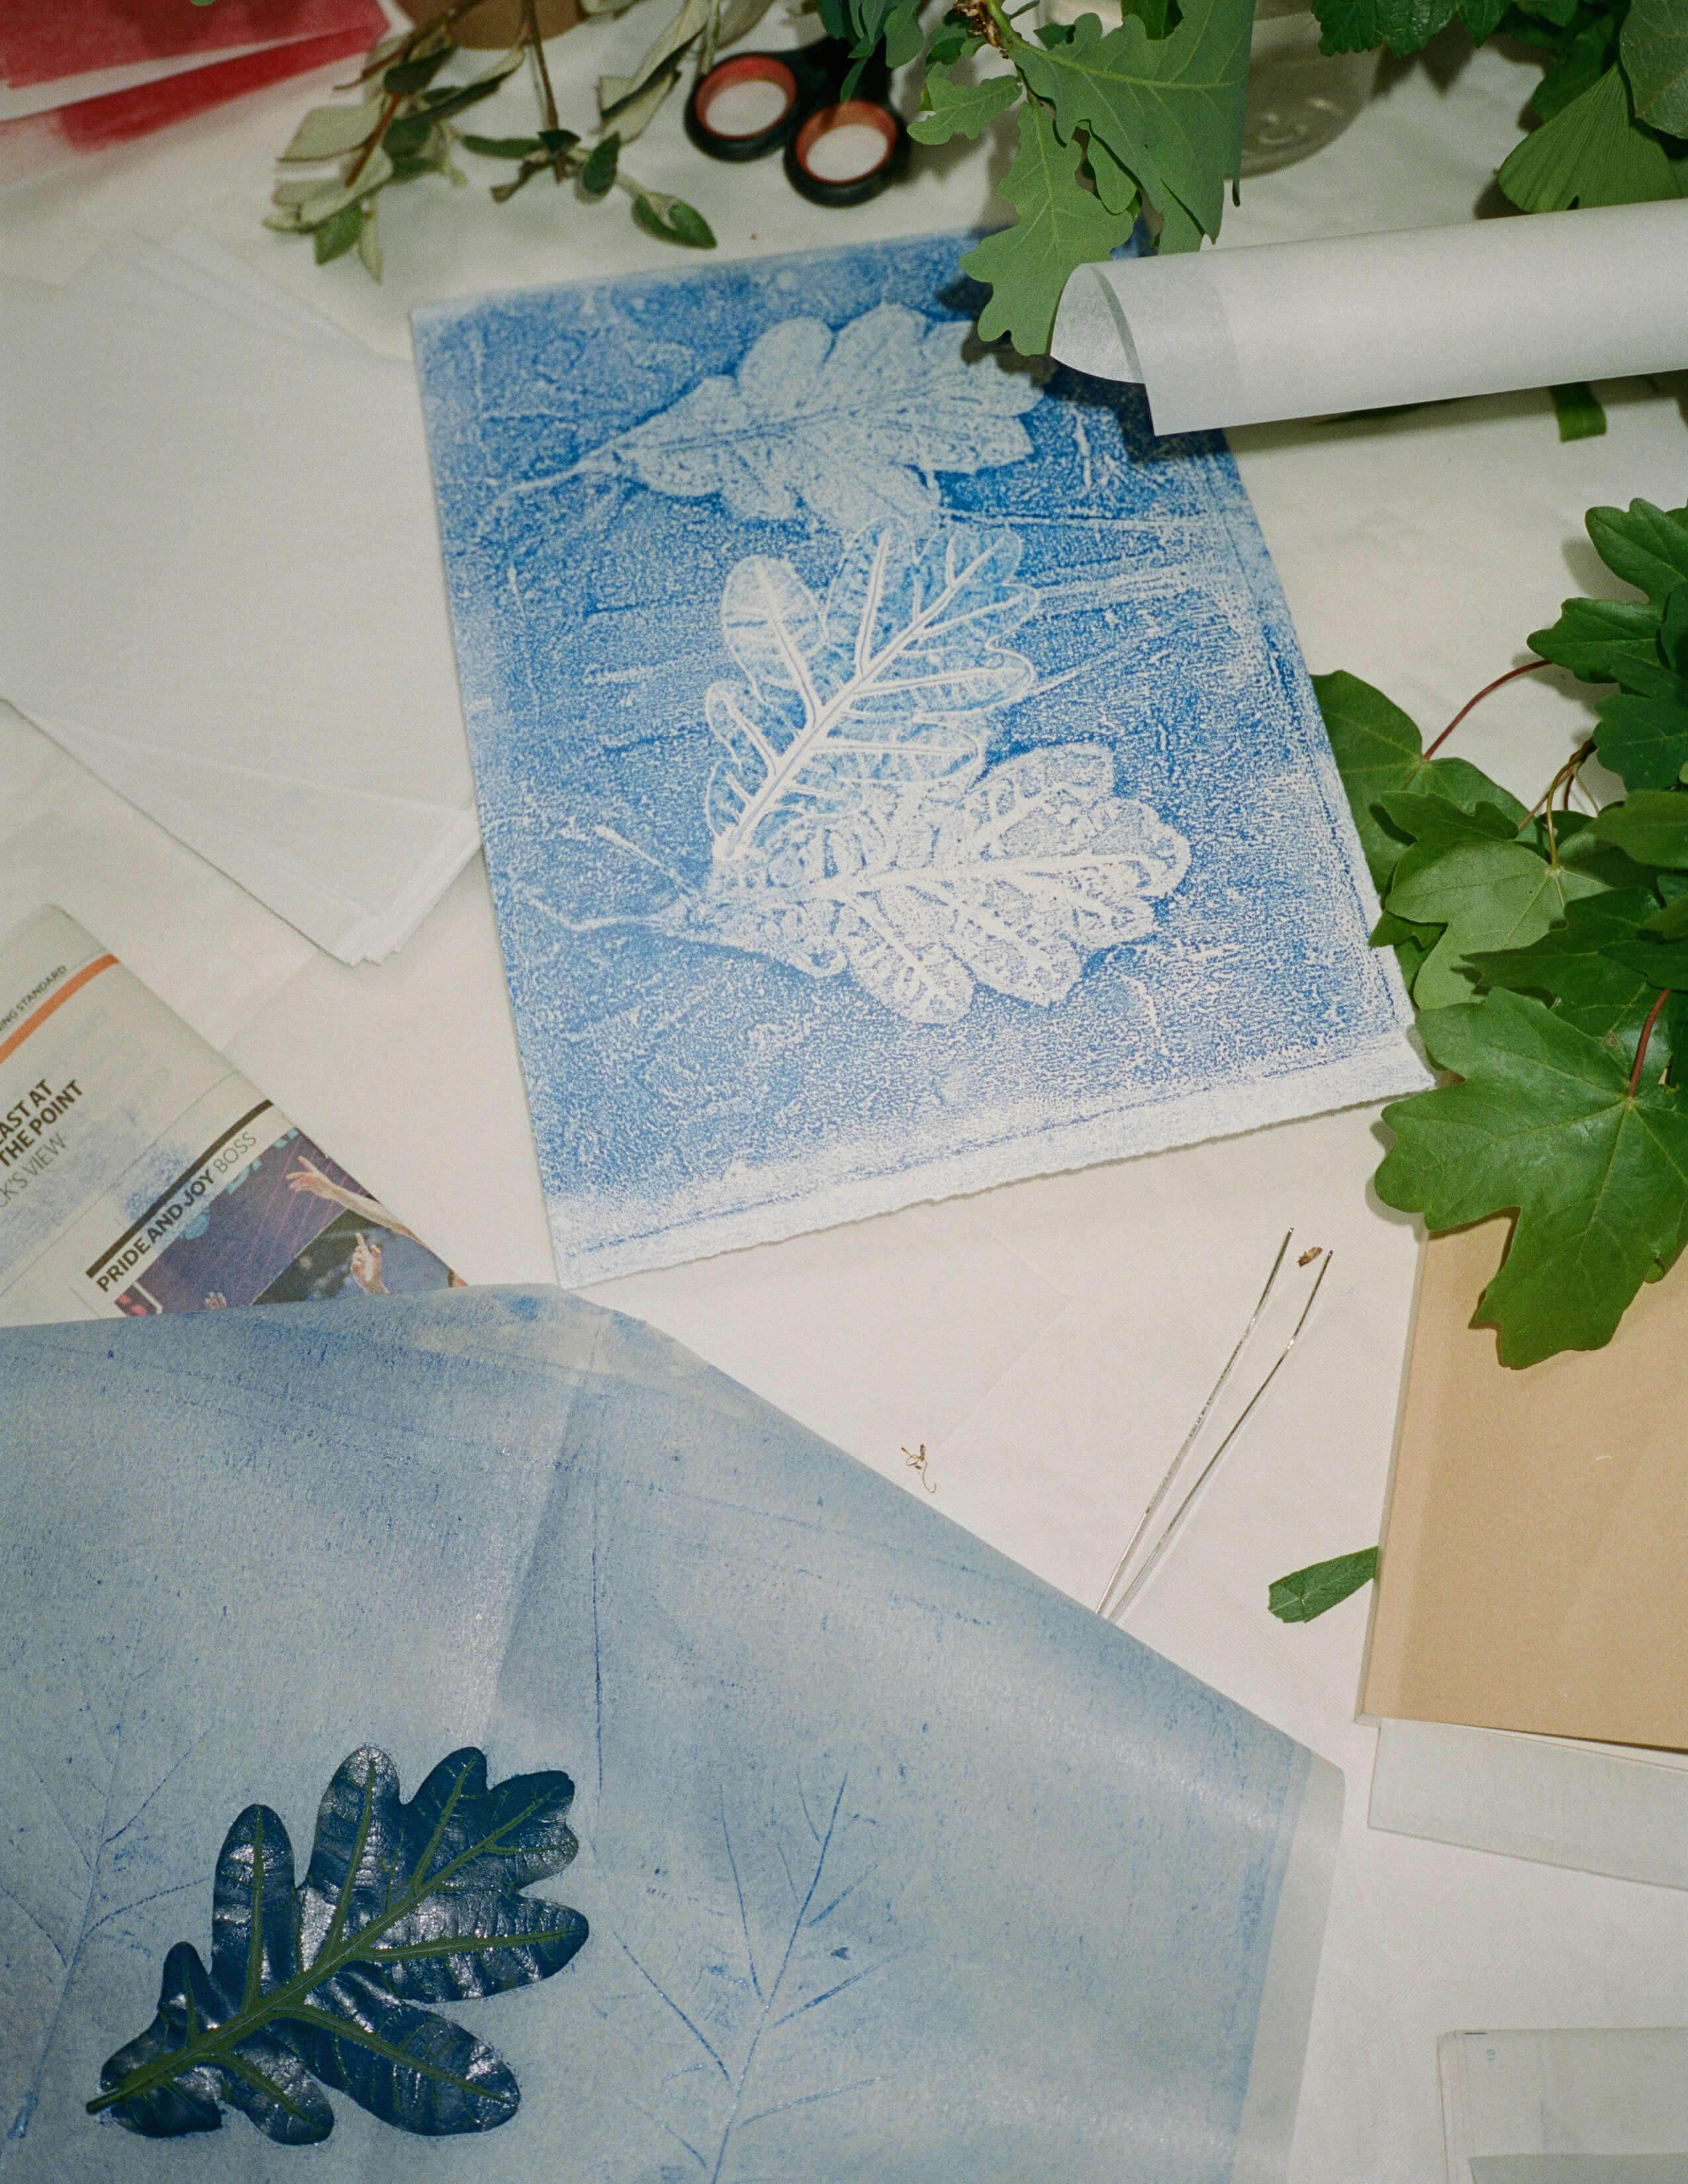 Nature plant printing with blue paint on the paper and there are some plant leaves around on the table.